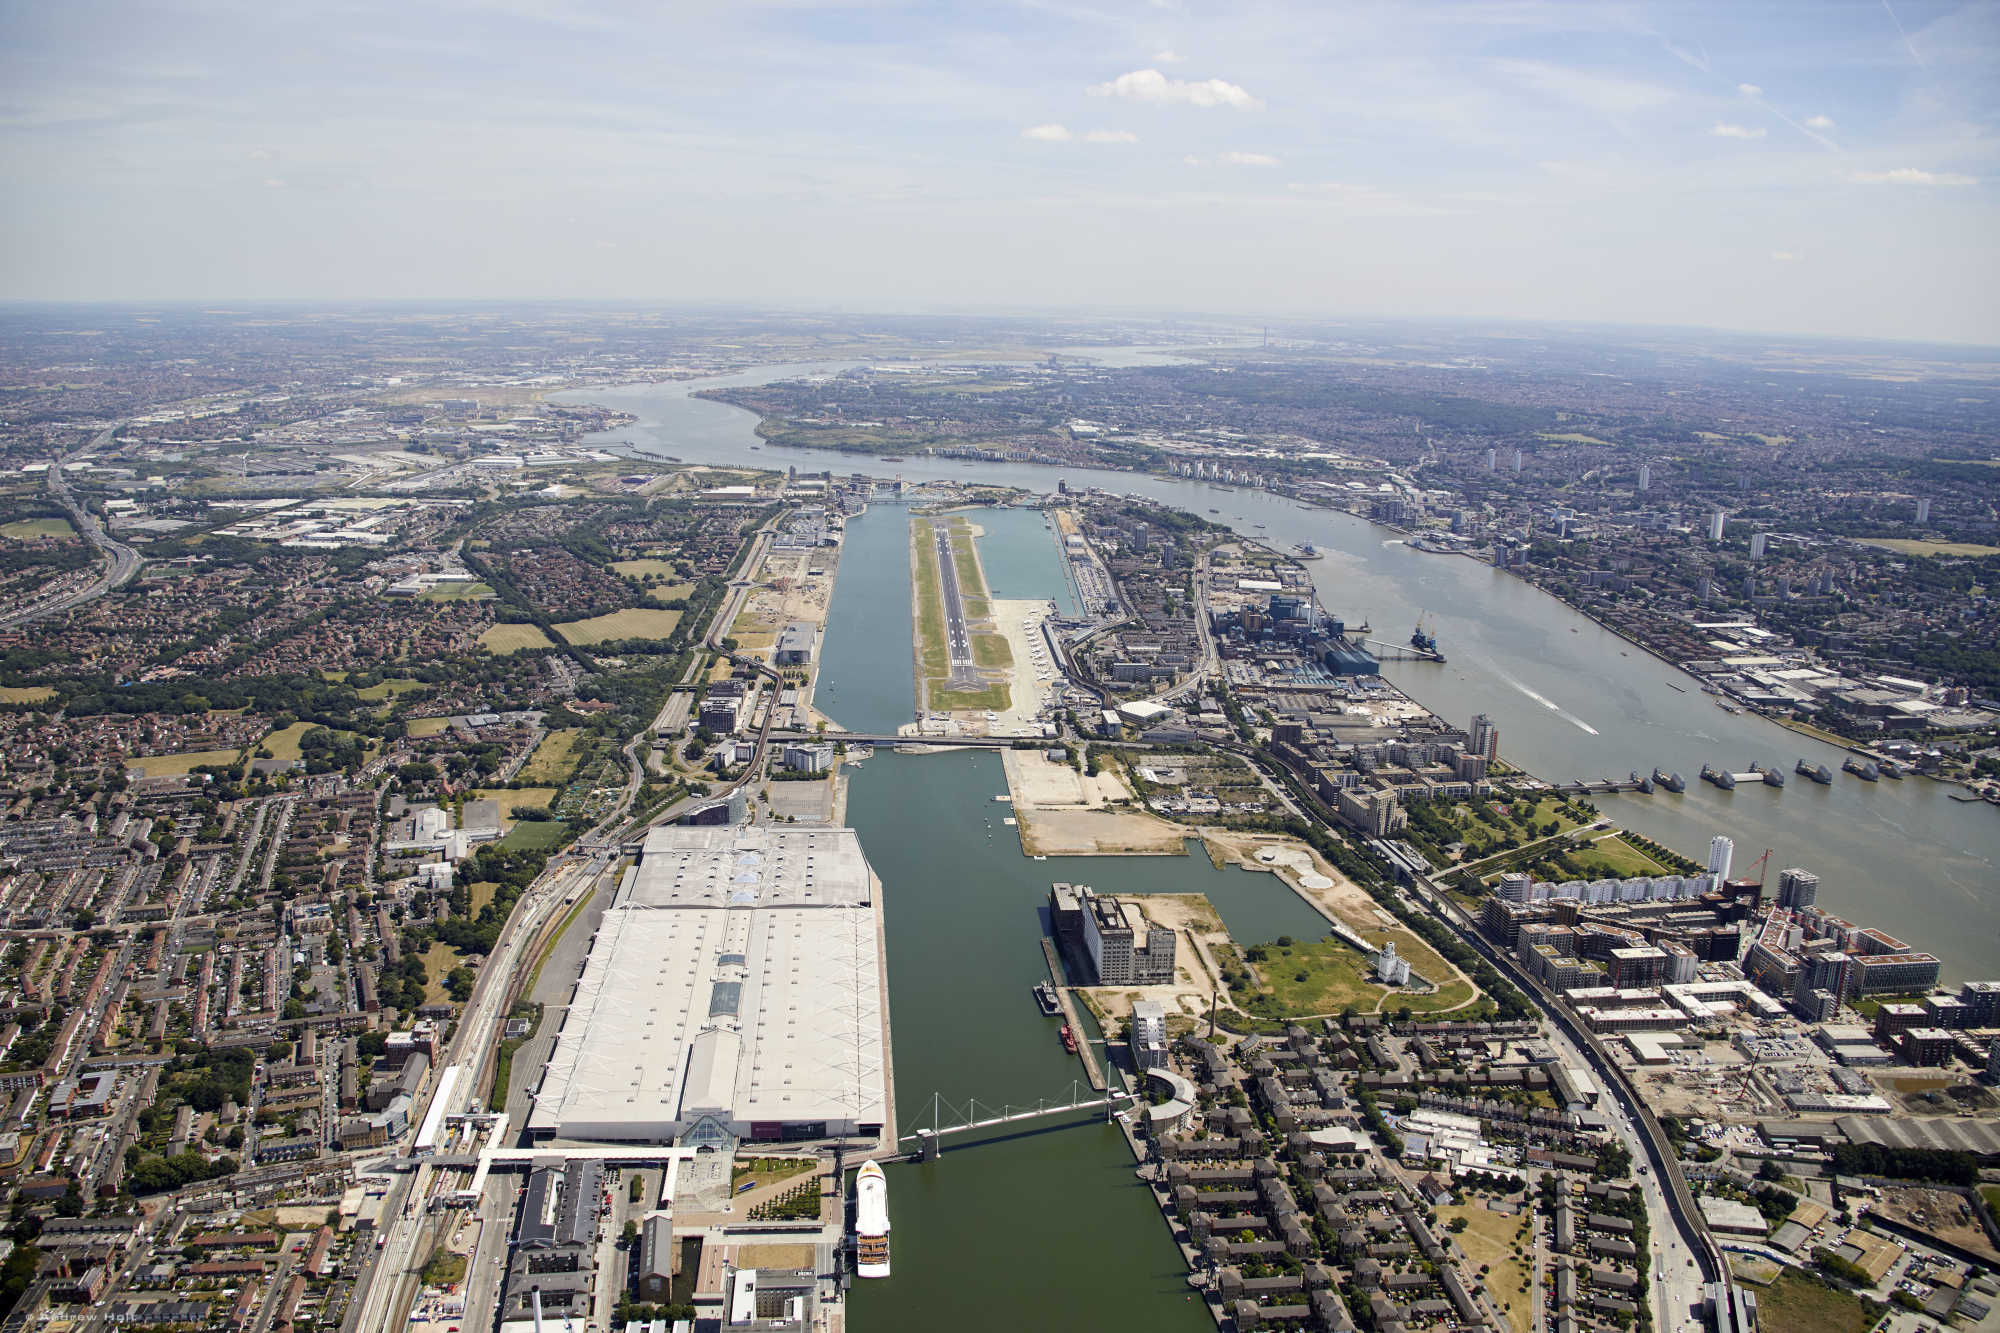 LCY from the sky